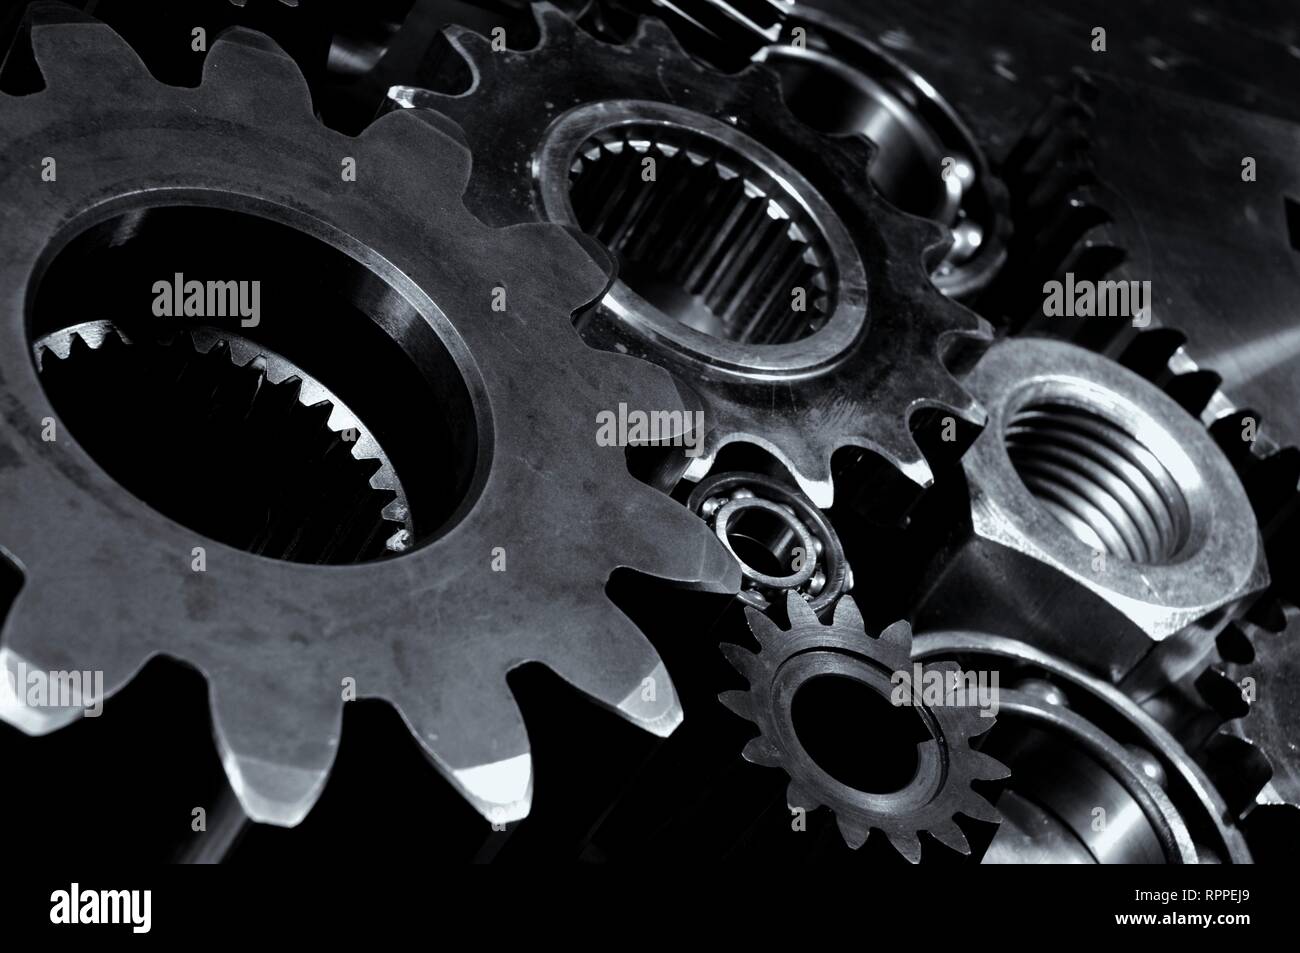 Large titanium gears and cogs mainly used in the aerospace industry and rockets. Stock Photo